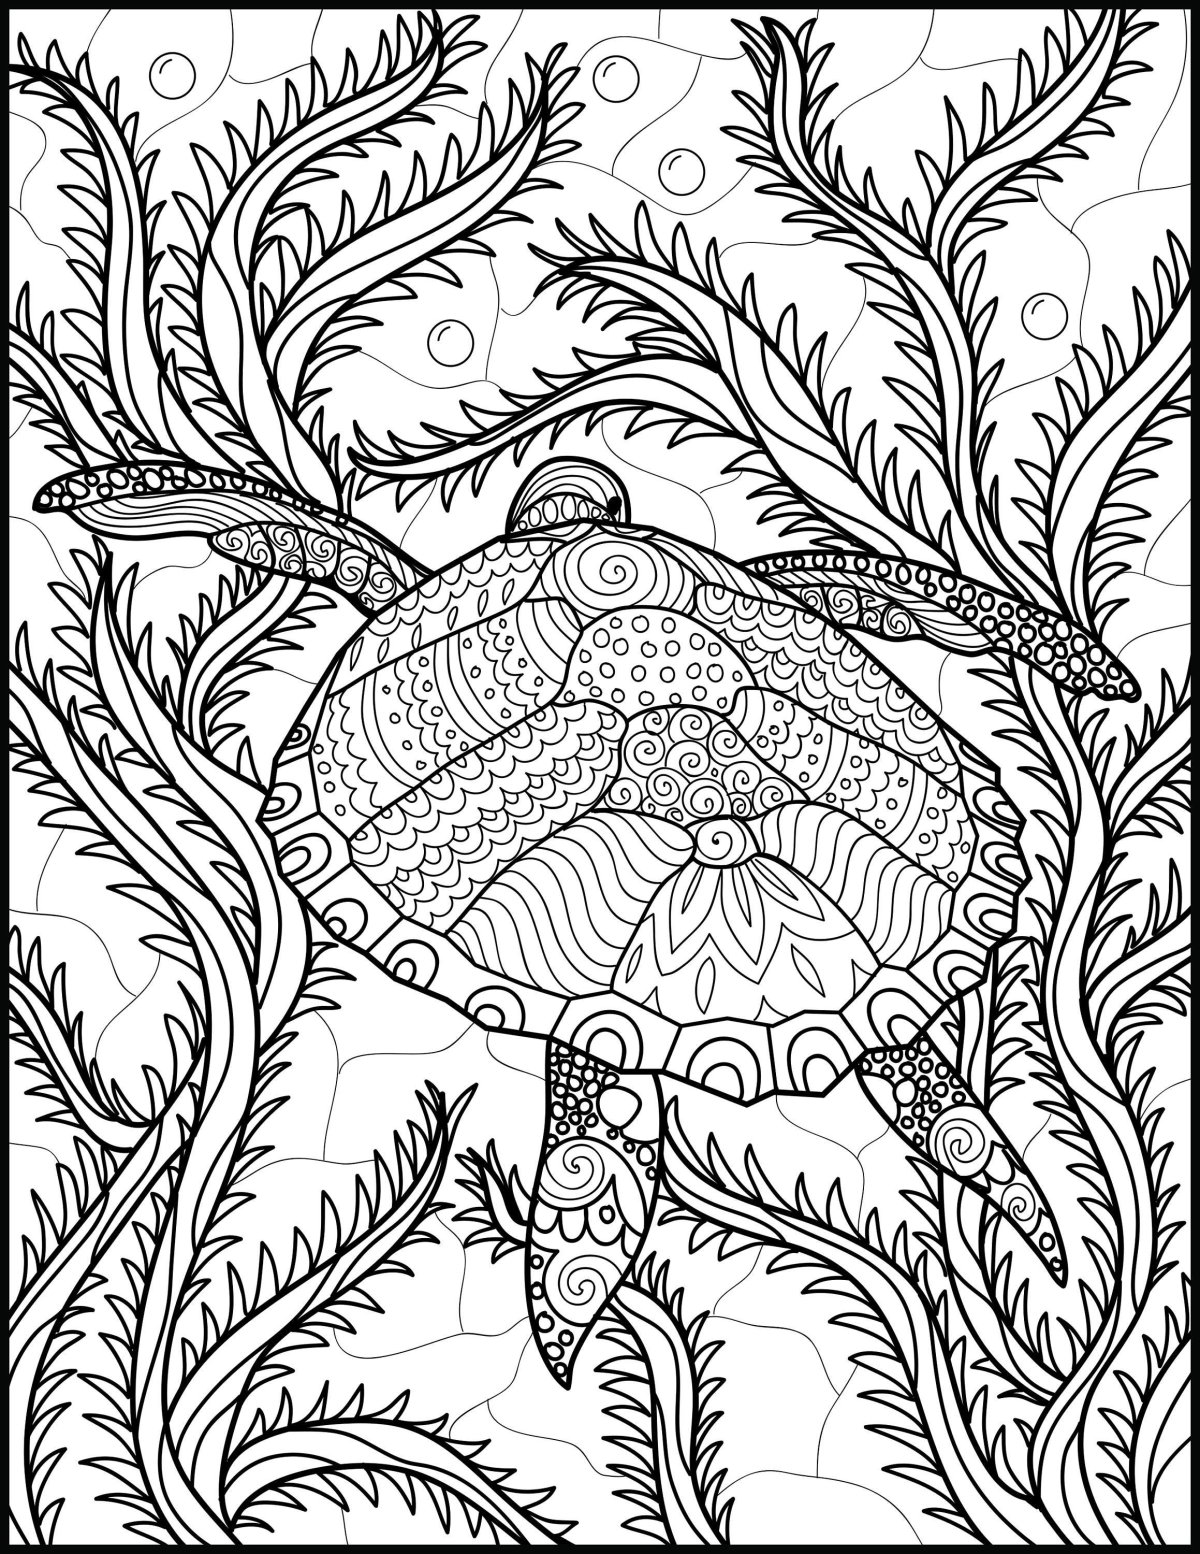 Great relaxation coloring book